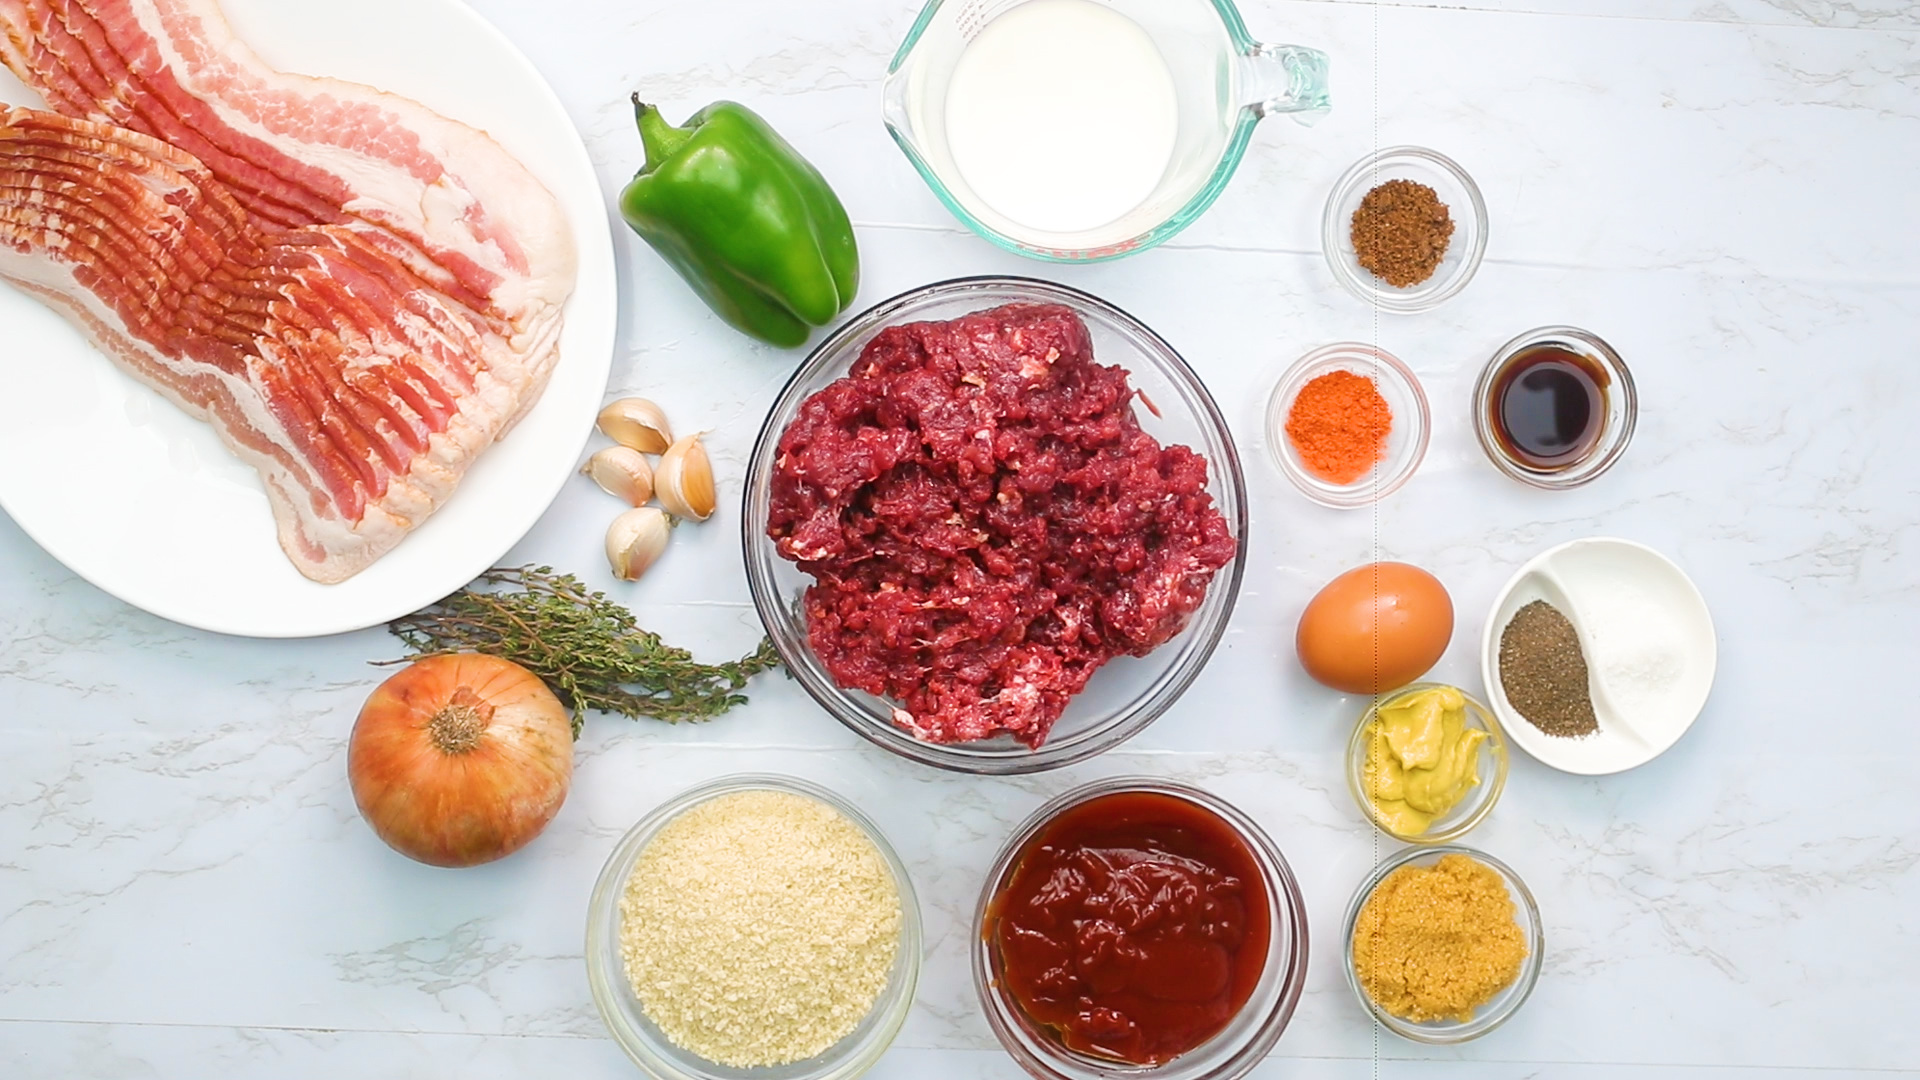 Bacon Wrapped Meatloaf Ingredients